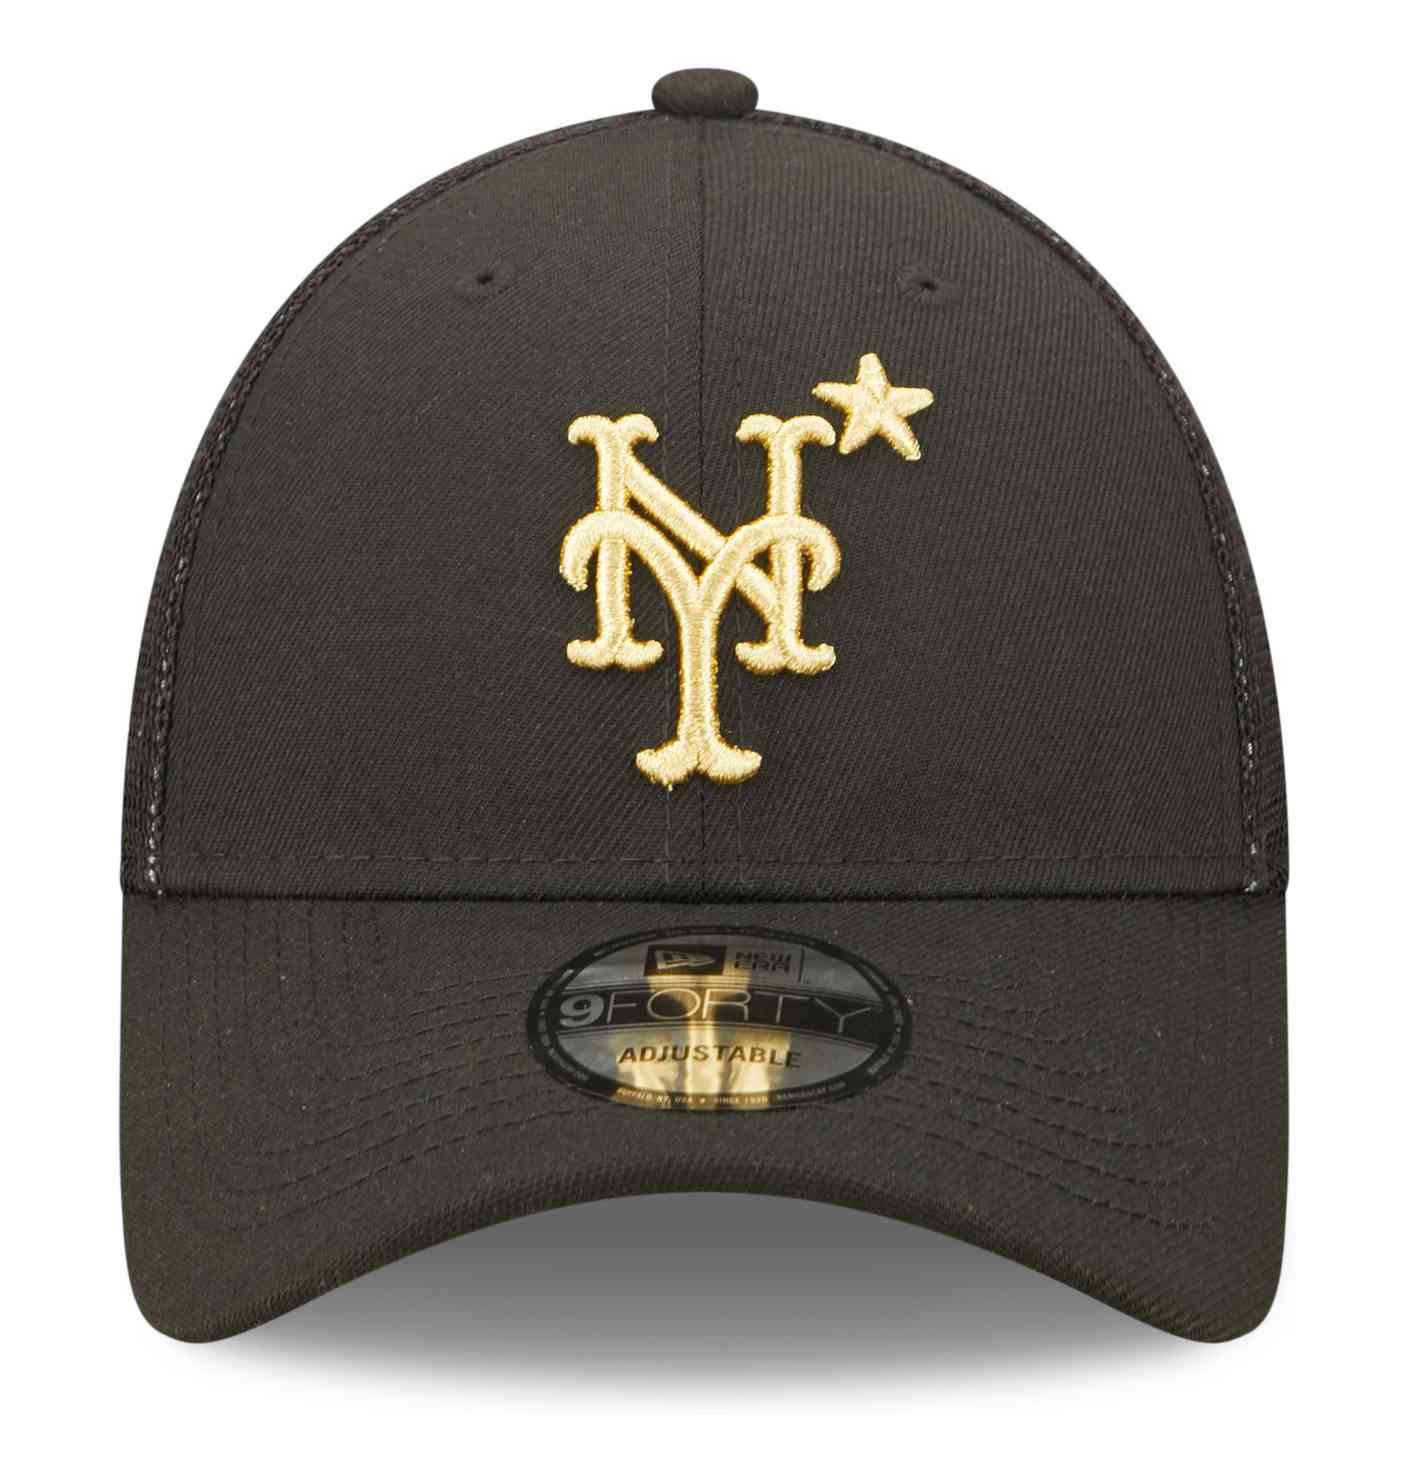 New Era - MLB New York Mets All Star Game Patch 9Forty Snapback Cap